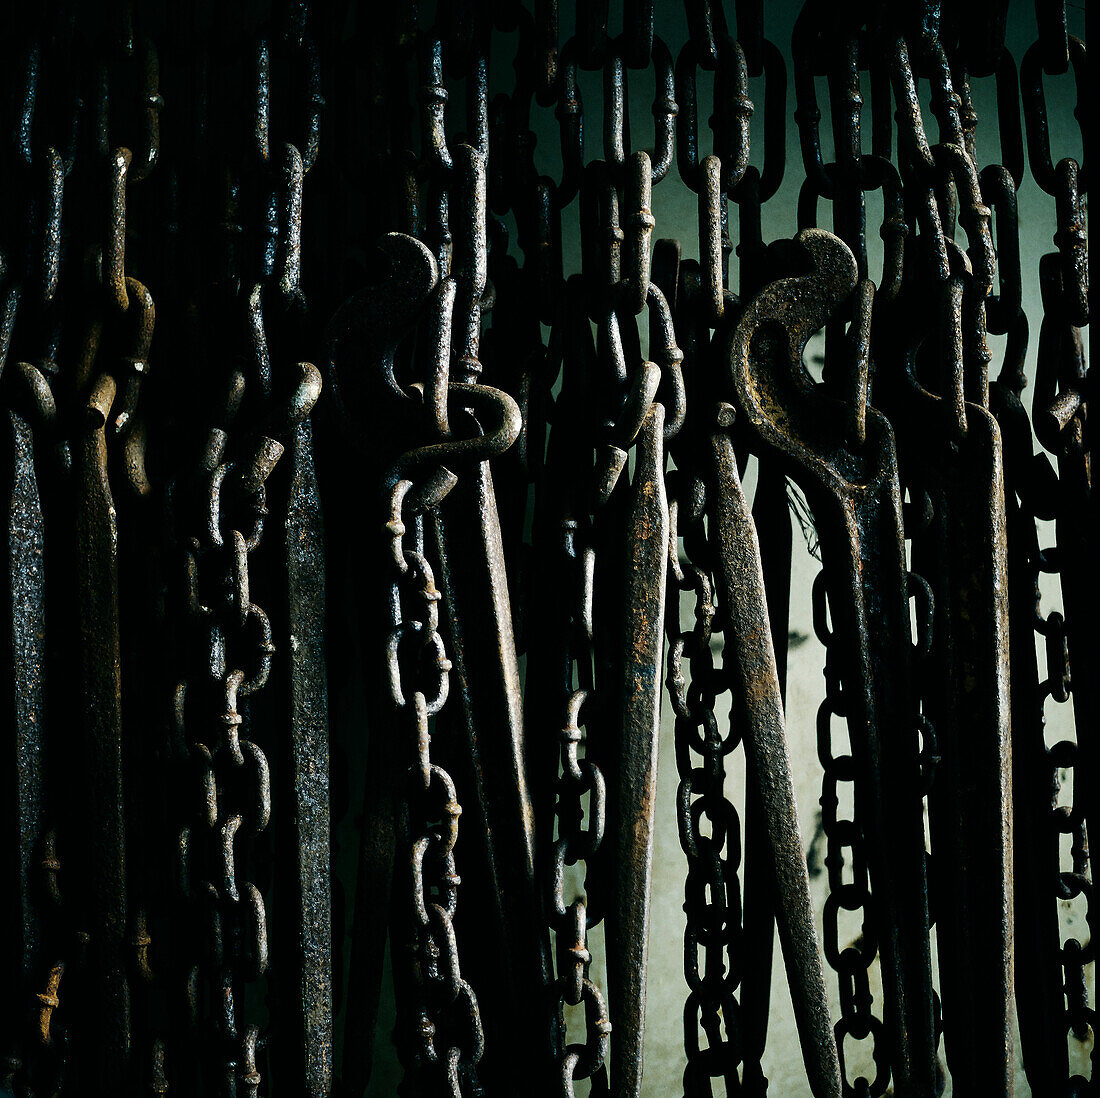 Close up of rusty chains hanging against side of ship